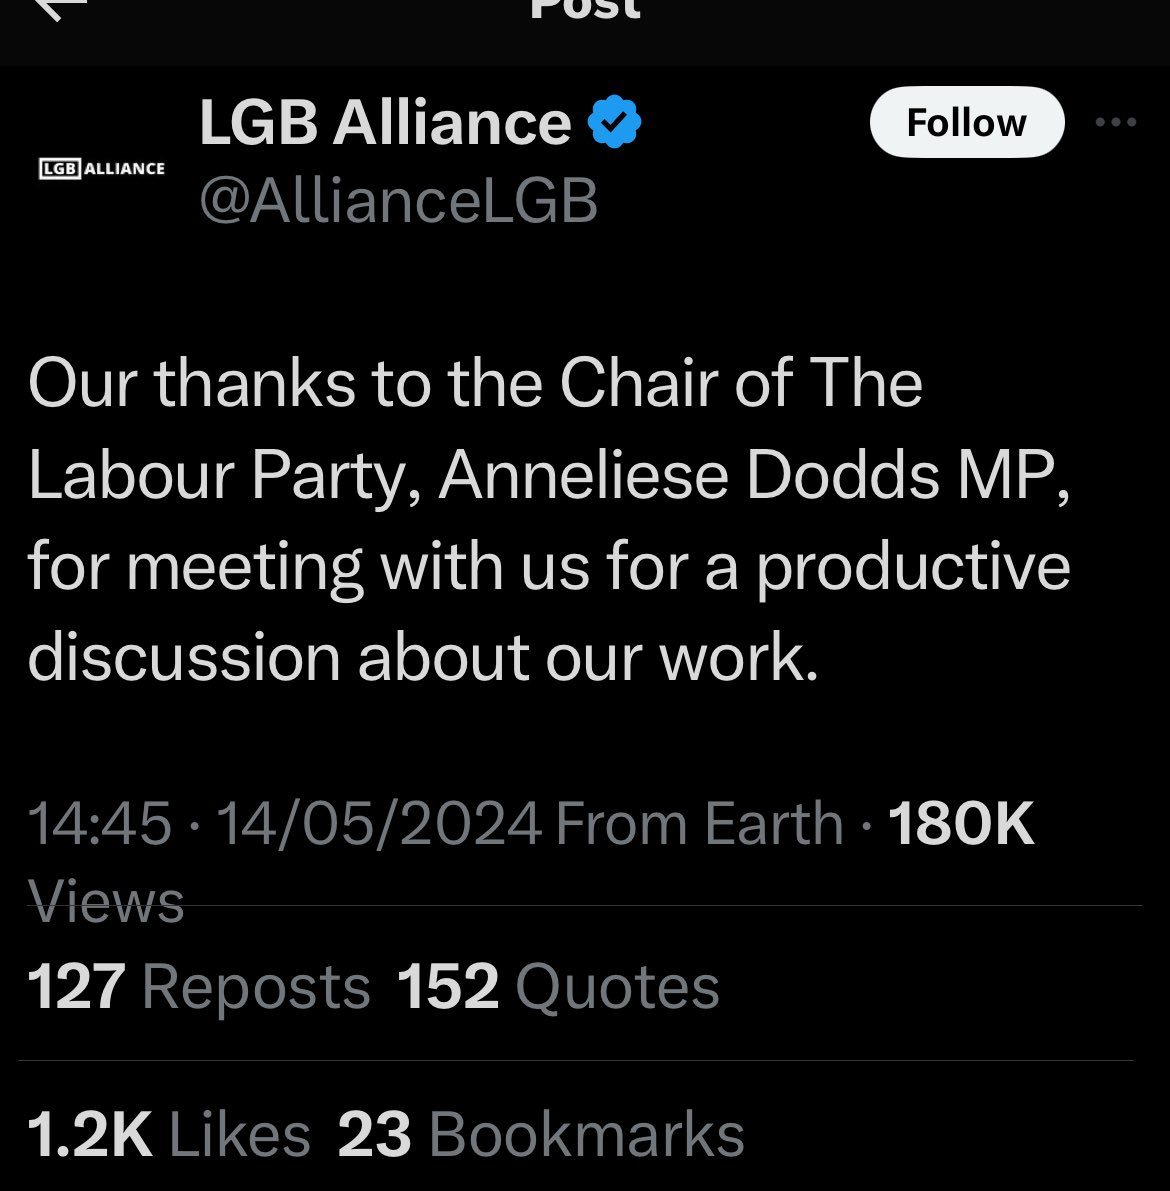 Just a reminder that LGB Alliance was set up by heterosexual culture warriors to campaign against the increasing social acceptance of trans men & women. It is based at 55 Tufton Street.